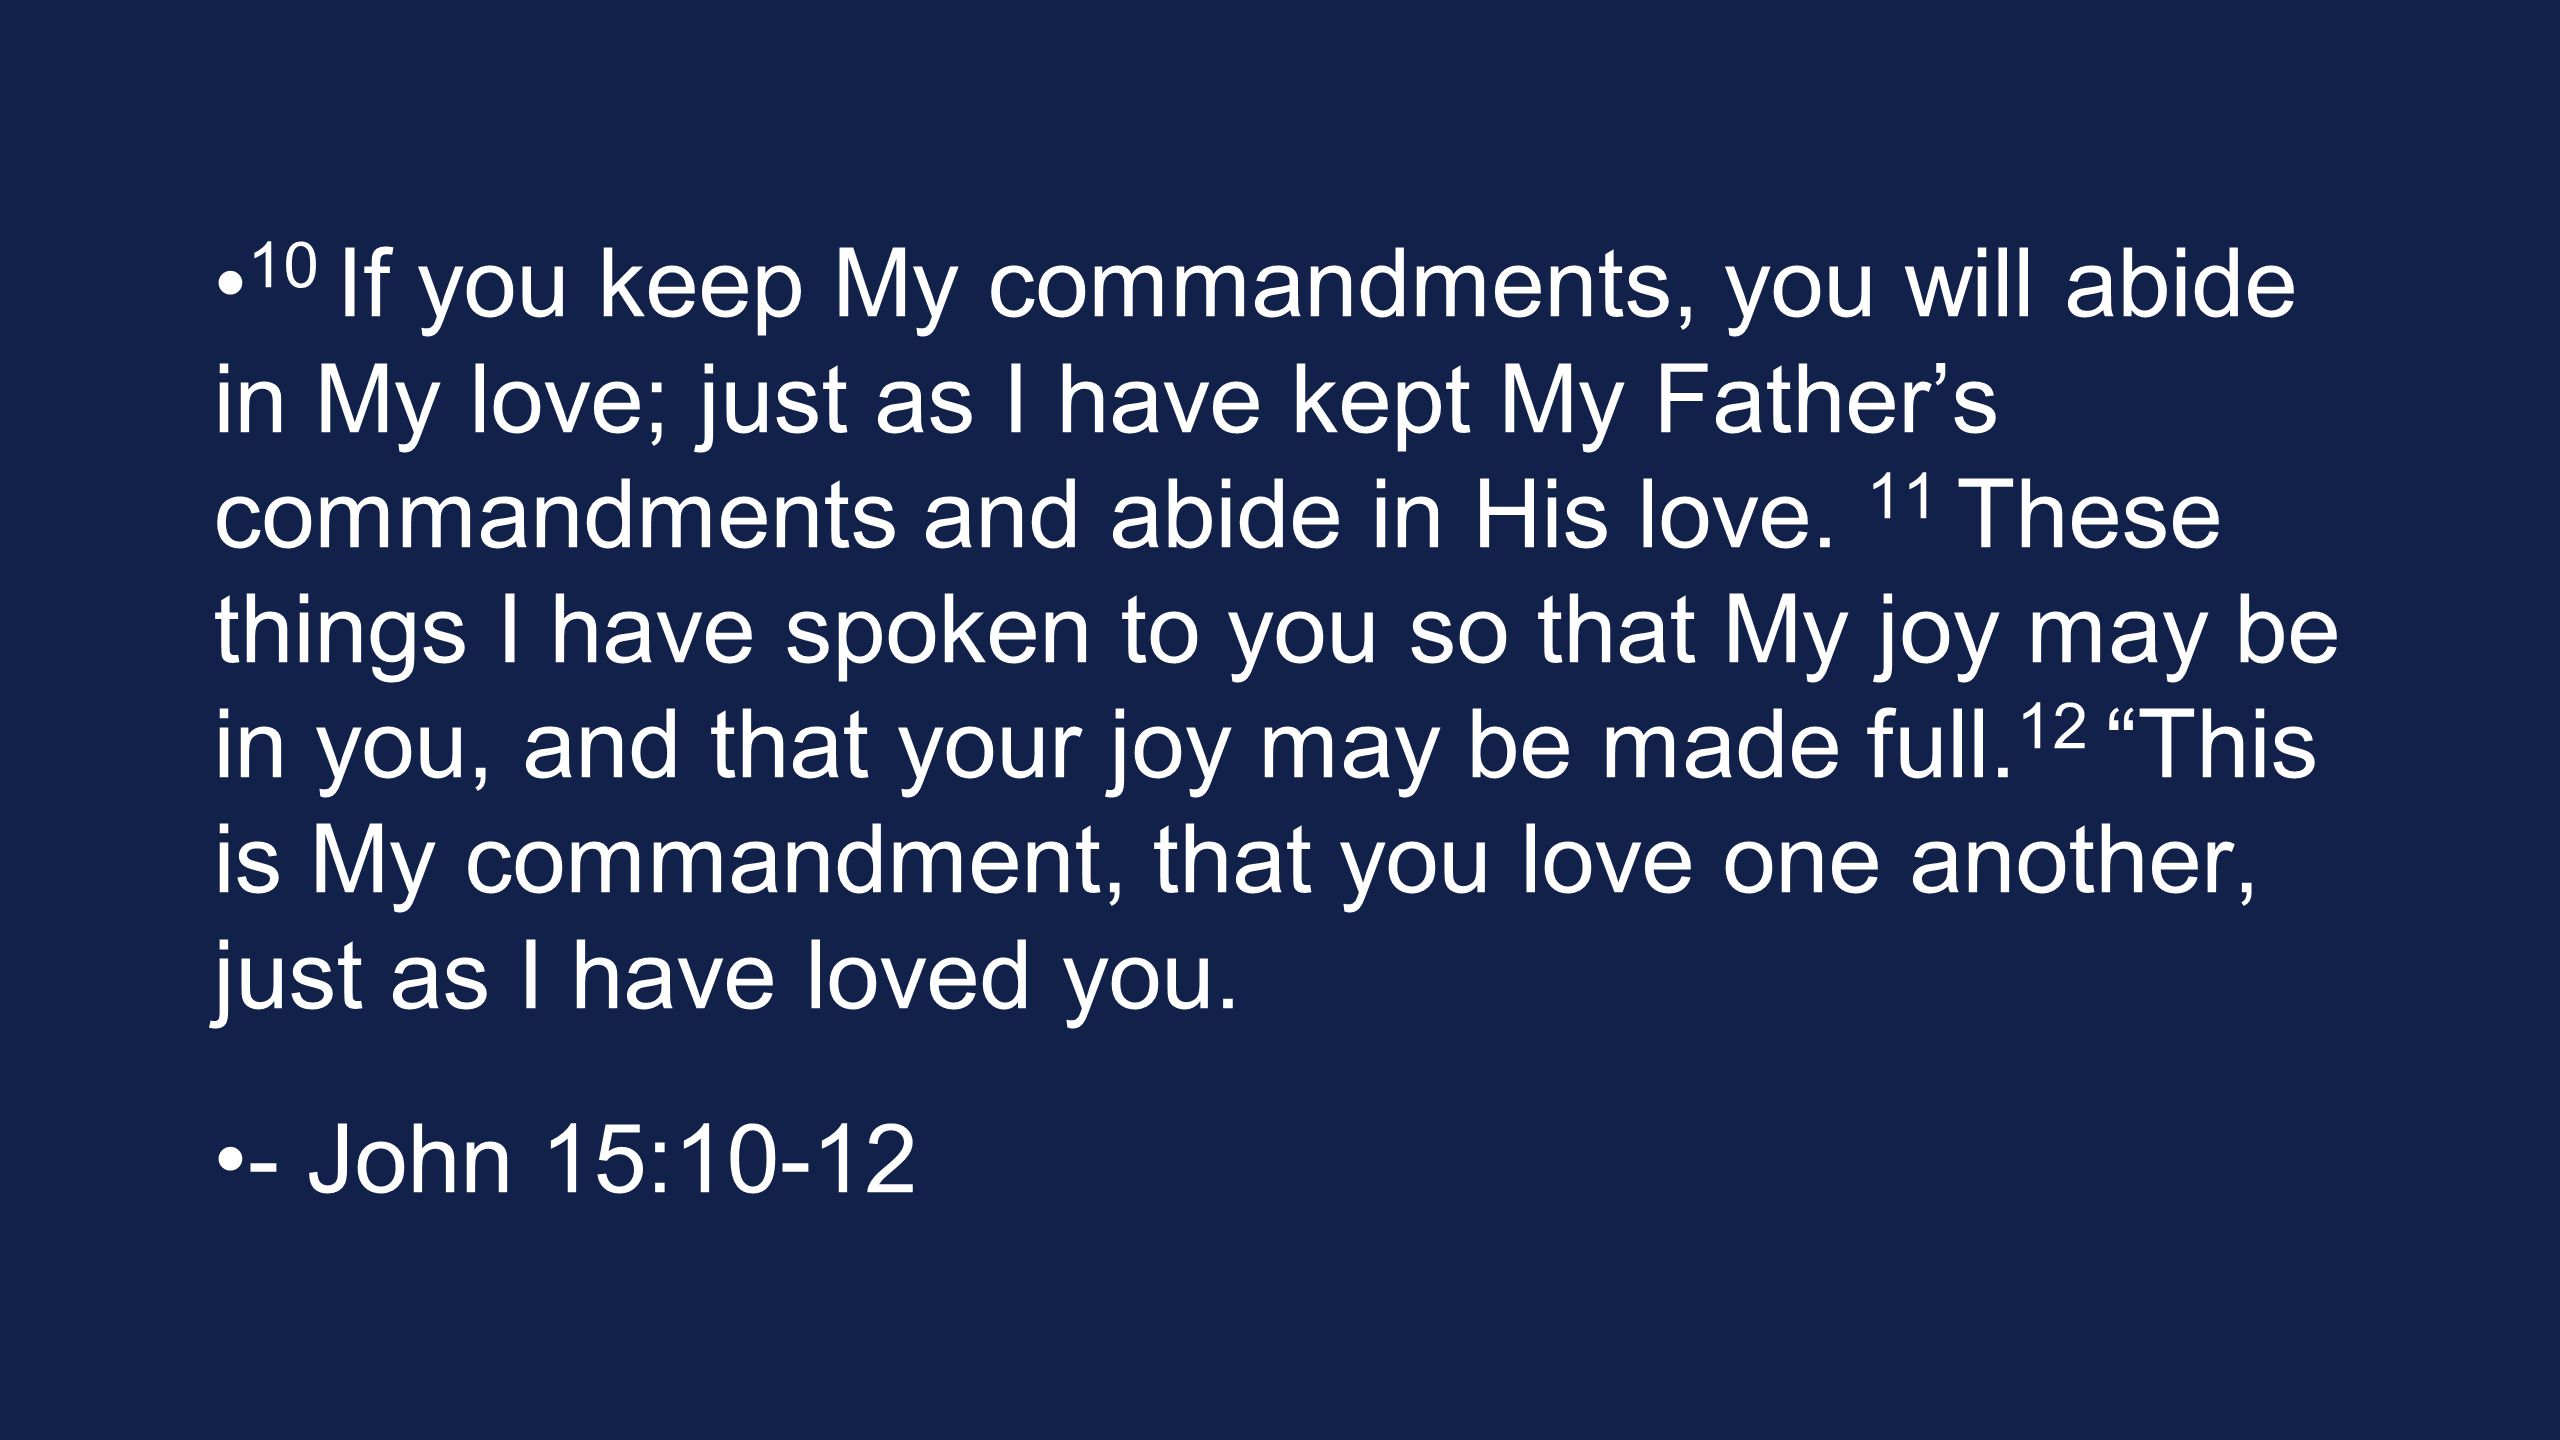 10 If you keep My commandments, you will abide in My love; just as I have kept My Father’s commandments and abide in His love.